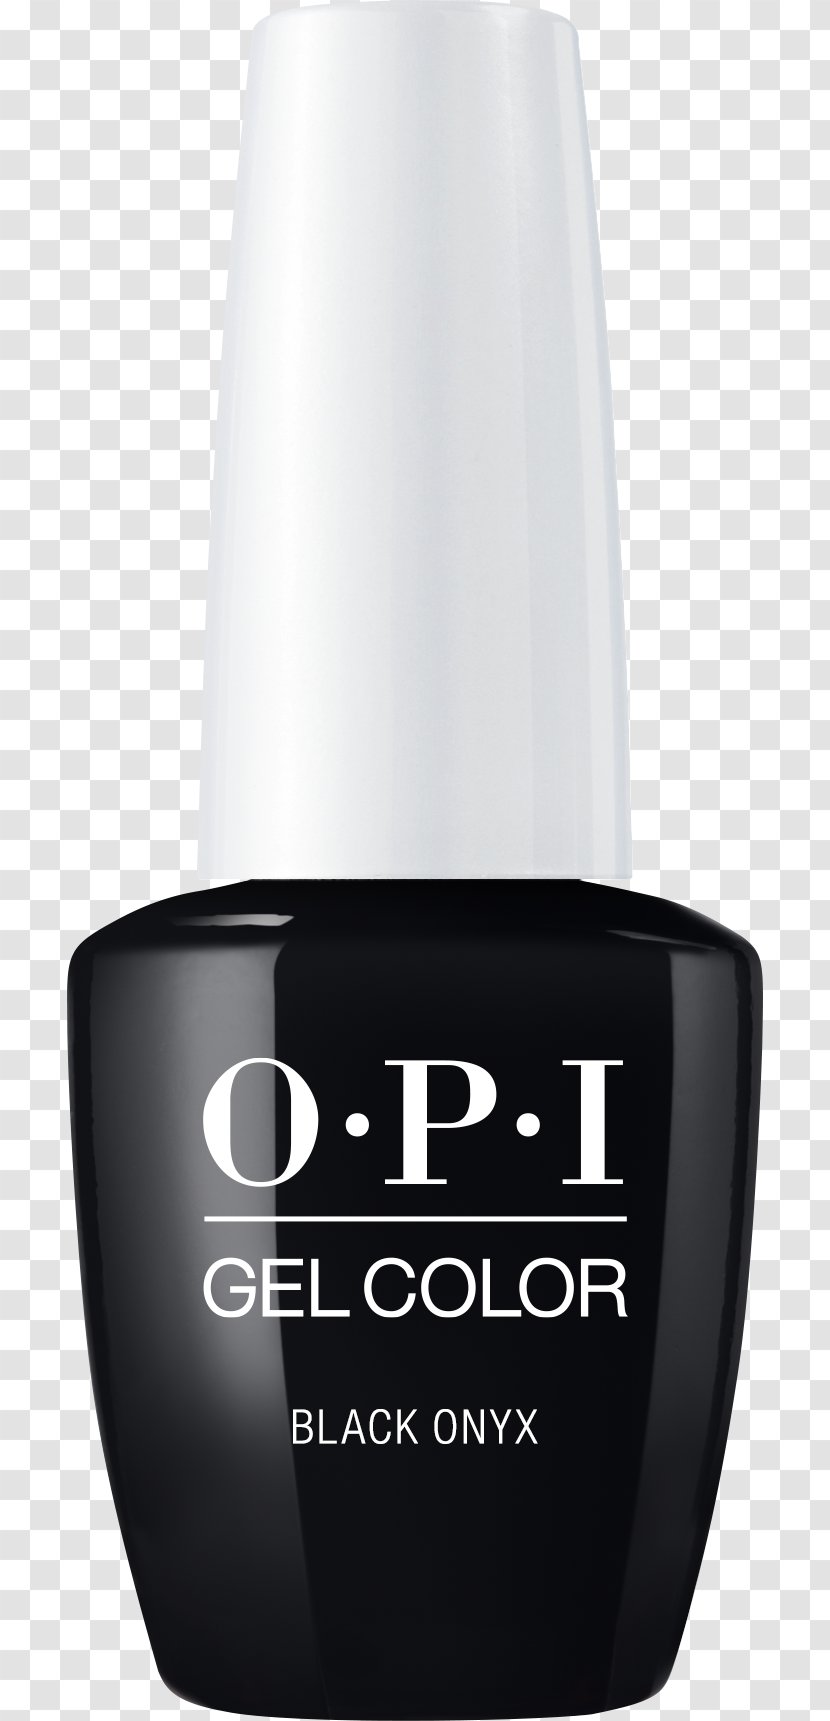 Cosmetics OPI Products GelColor Nail Polish - Gel - Black Onyx Transparent PNG